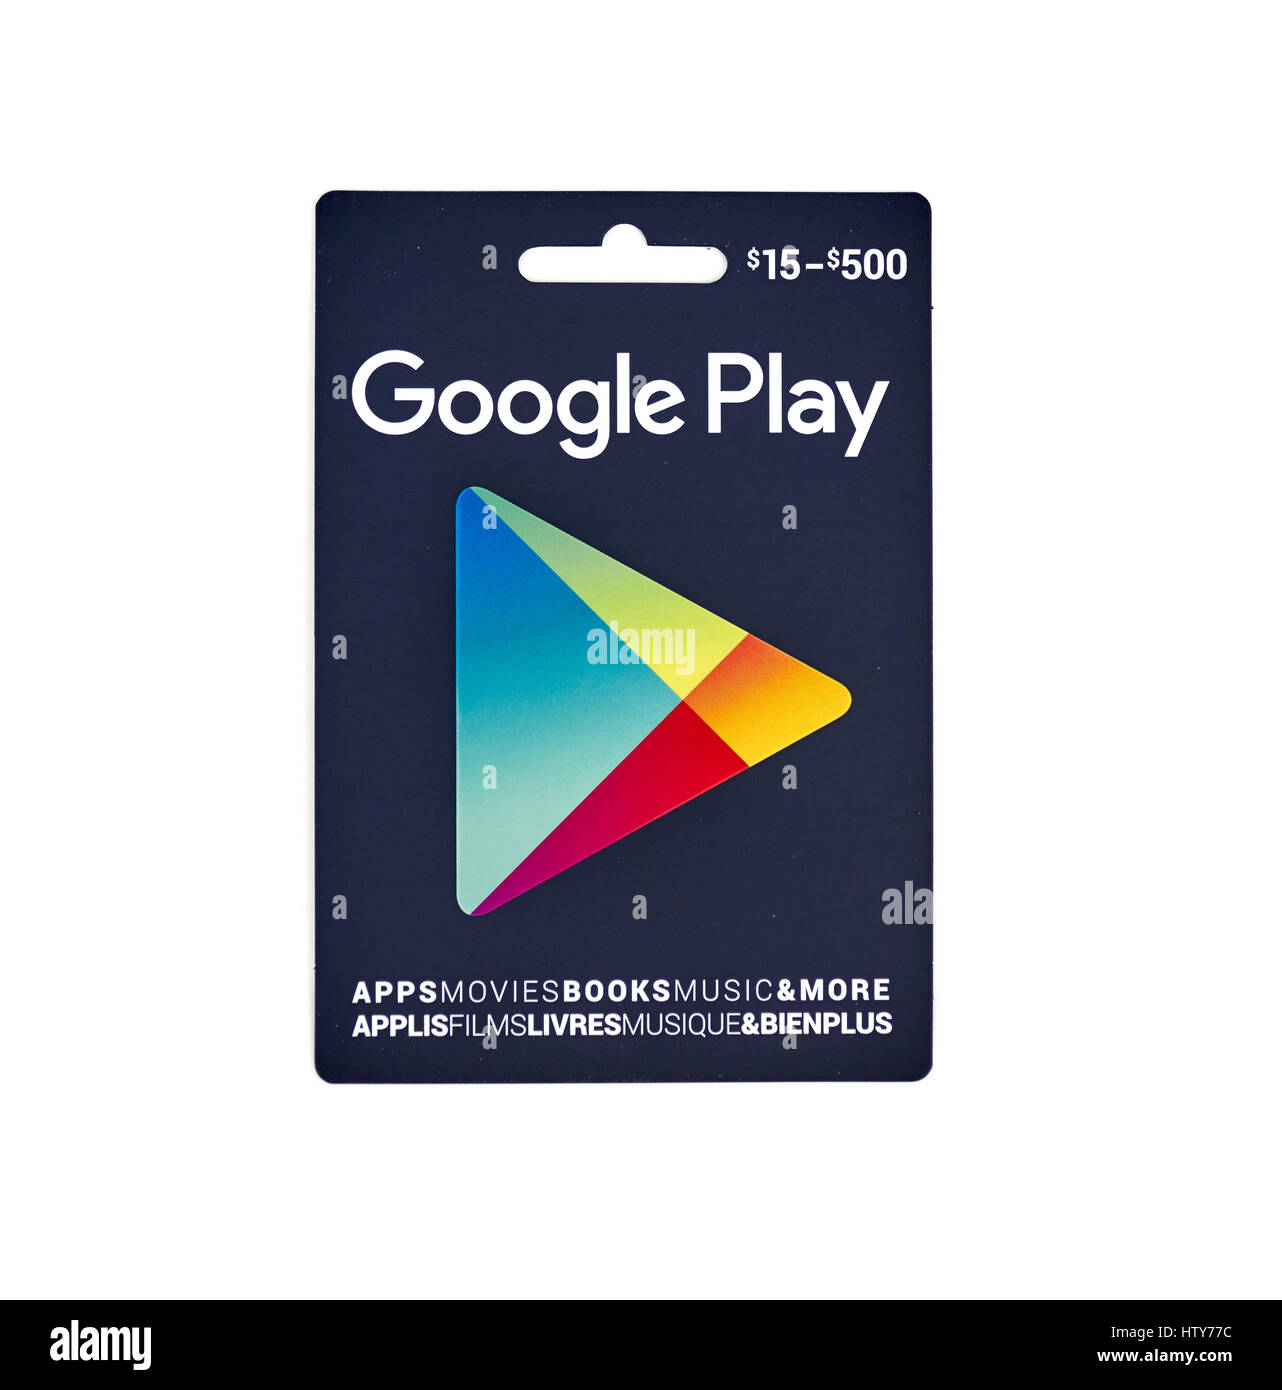 MONTREAL, CANADA - MARCH 10, 2017 : Google Play popular giftcard. The card is a prepaid stored-value money card issued to be used as an alternative to Stock Photo